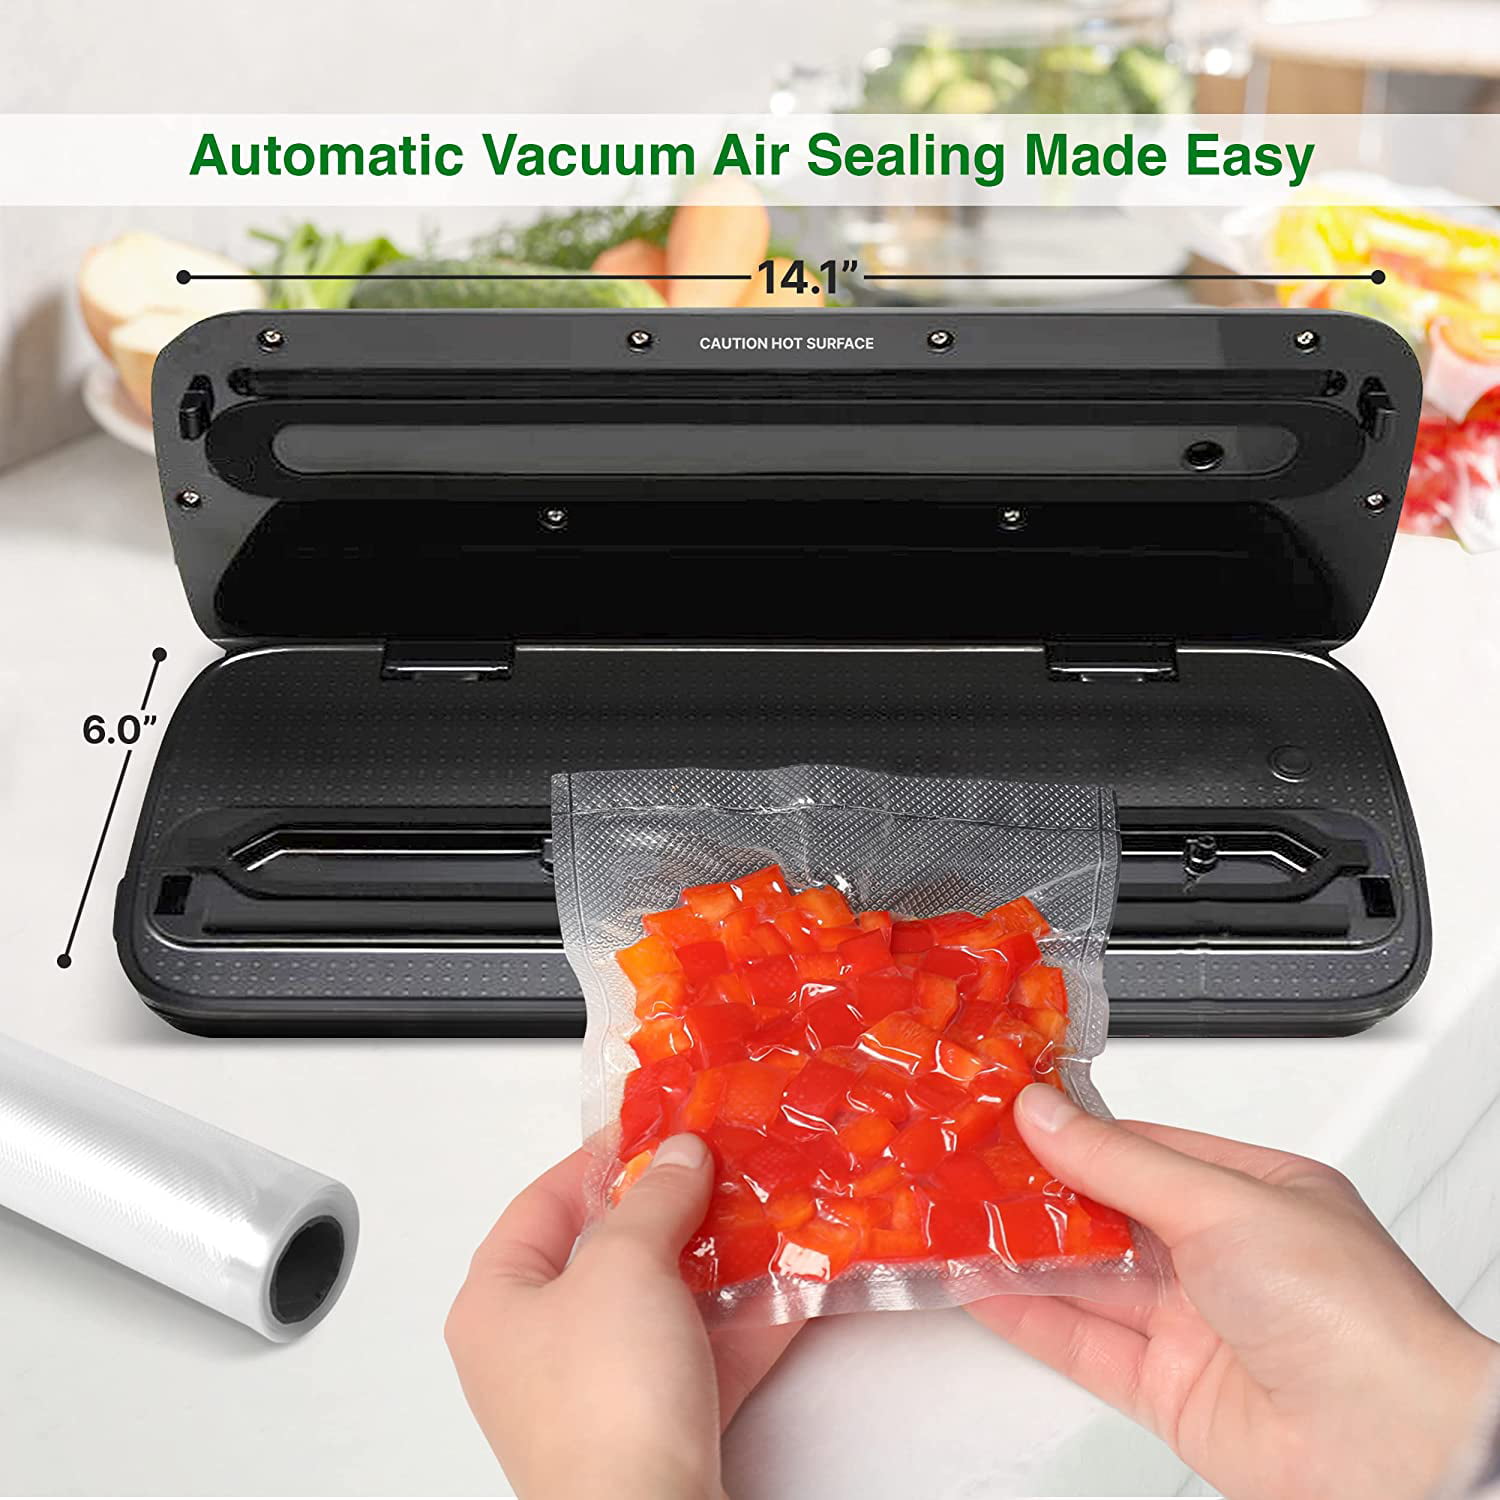 NutriChef PKVS Sealer, Automatic Vacuum Air Sealing System Preservation  w/Starter Kit, Compact Design, Lab Tested, Dry & Moist Food Modes